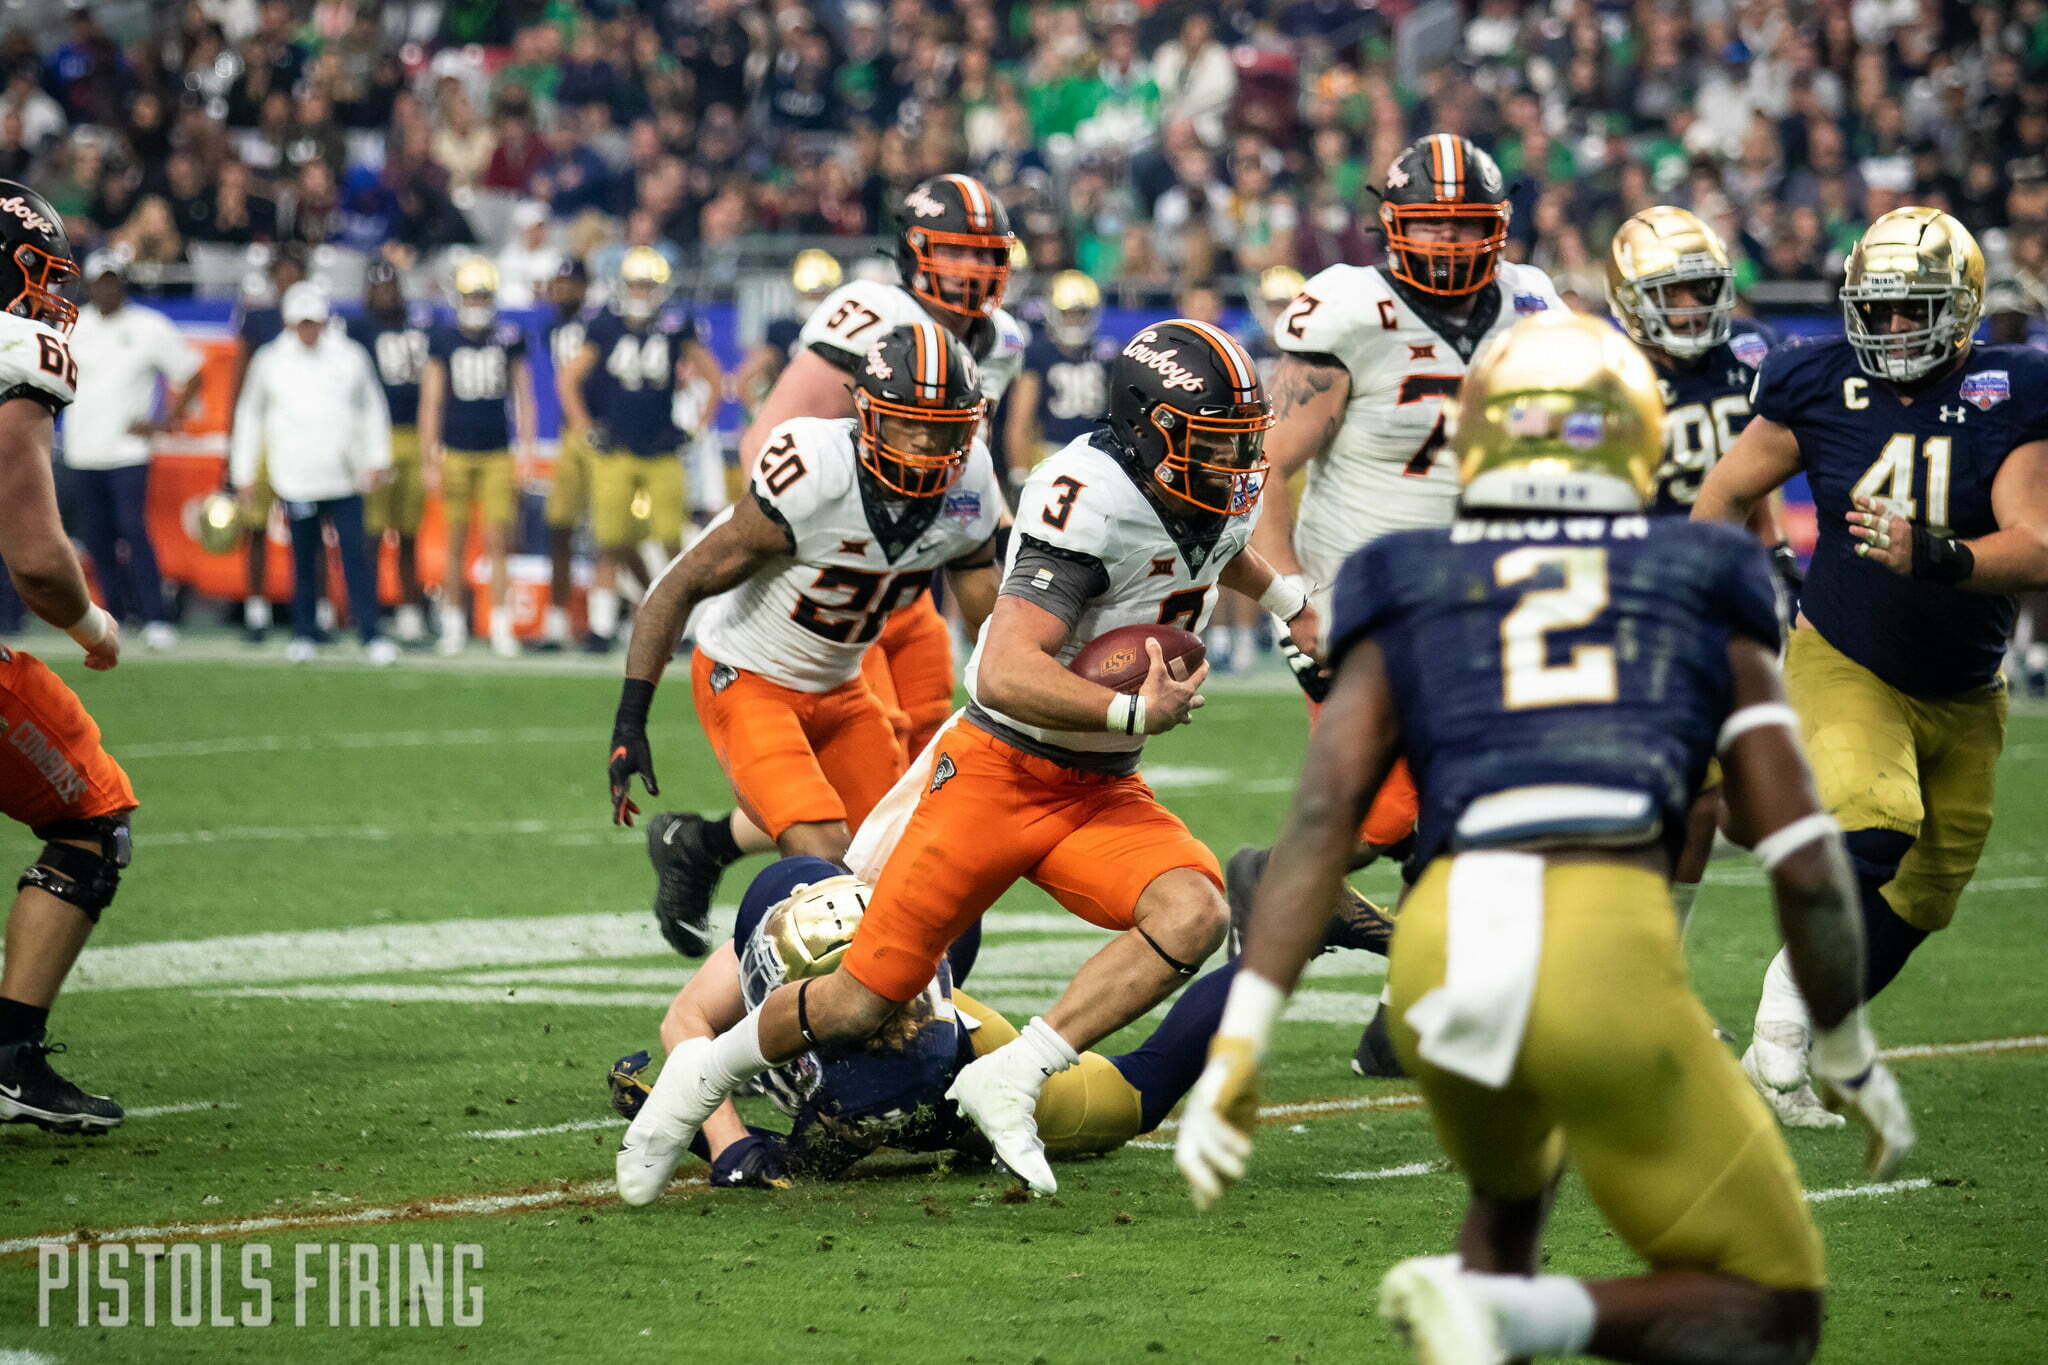 PFB's Best Photos from Oklahoma State's Fiesta Bowl Victory against